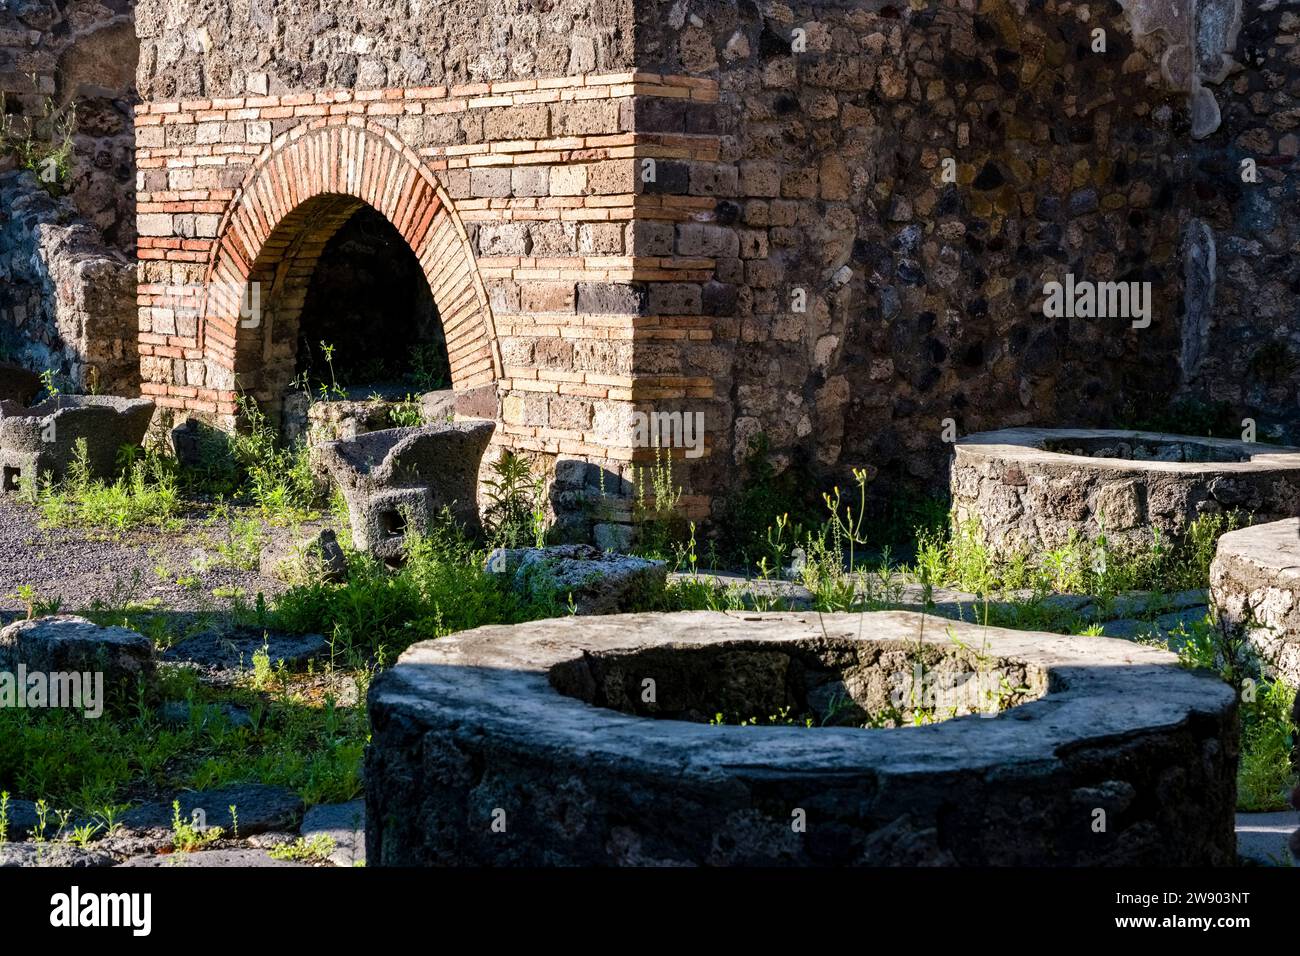 Ruins of the Pistrinum in the archaeological site of Pompeii, an ancient city destroyed by the eruption of Mount Vesuvius in 79 AD. Stock Photo